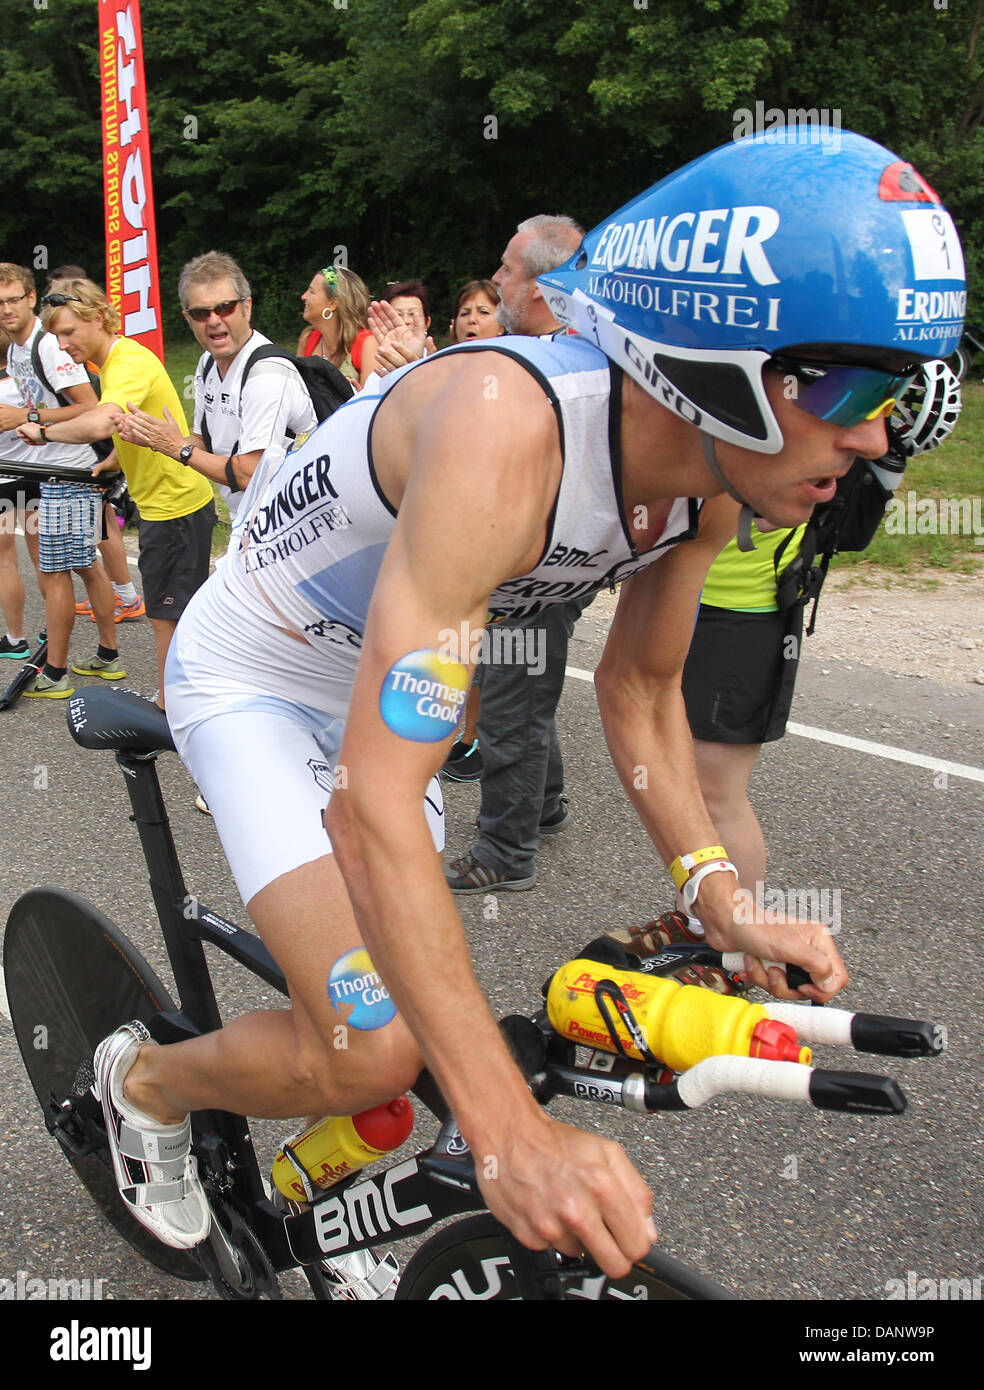 German triathlete Andreas Raelert cycles uphill during the cycling etappe of the 10th Ironman Challenge in Hipoltstein, Germany, 10 July 2011. Andreas Raelert has won first place and made a new world record. For the ironman, the participants have to swim 3,8 km, cycle 180 km and run 42,195 km. Photo: Daniel Karmann Stock Photo